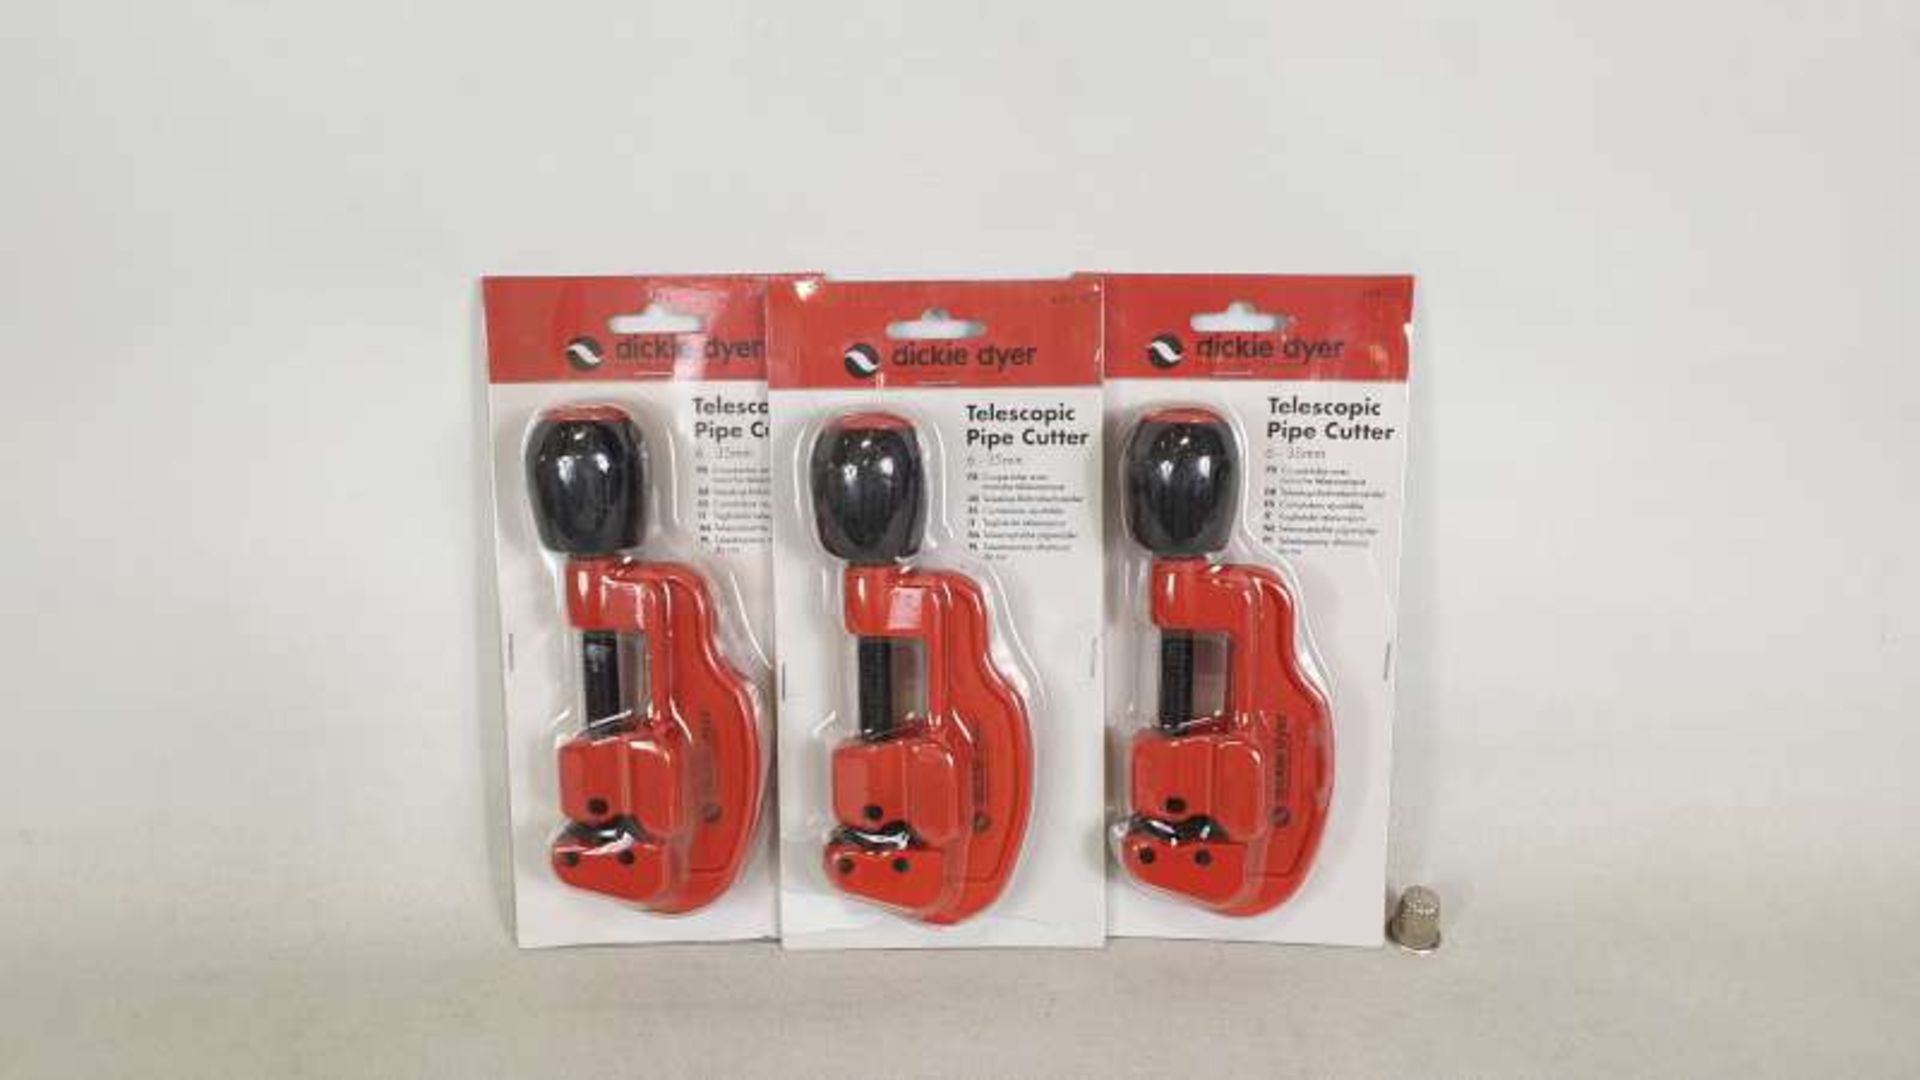 18 X BRAND NEW DICKIE DYER TELESCOPIC PIPE CUTTERS 6 - 35MM